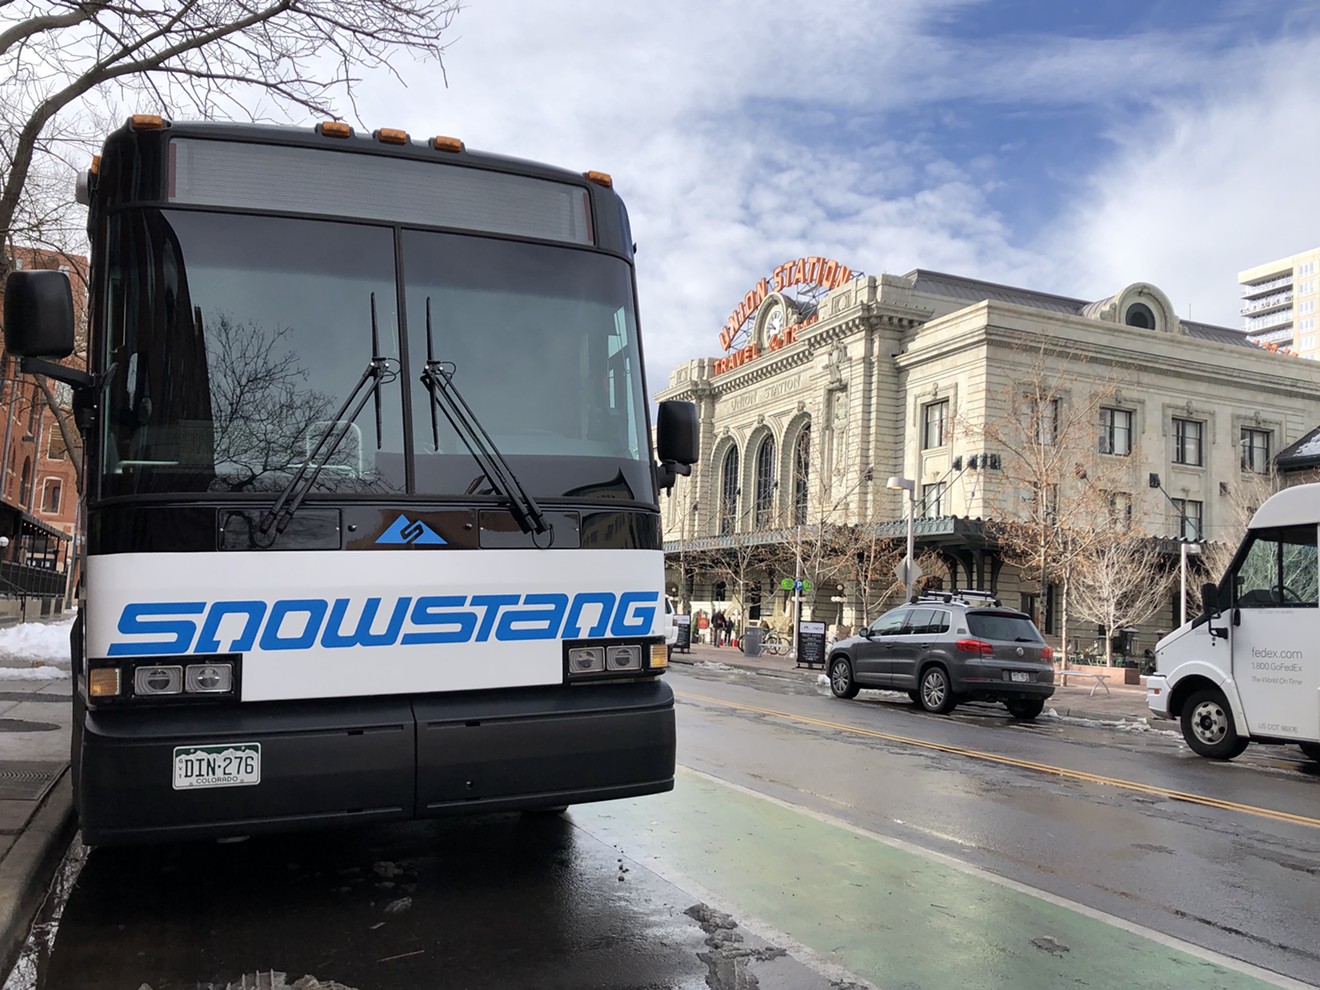 CDOT will offer bus service between Denver and three mountain ski areas on Saturdays and Sundays beginning December 14.